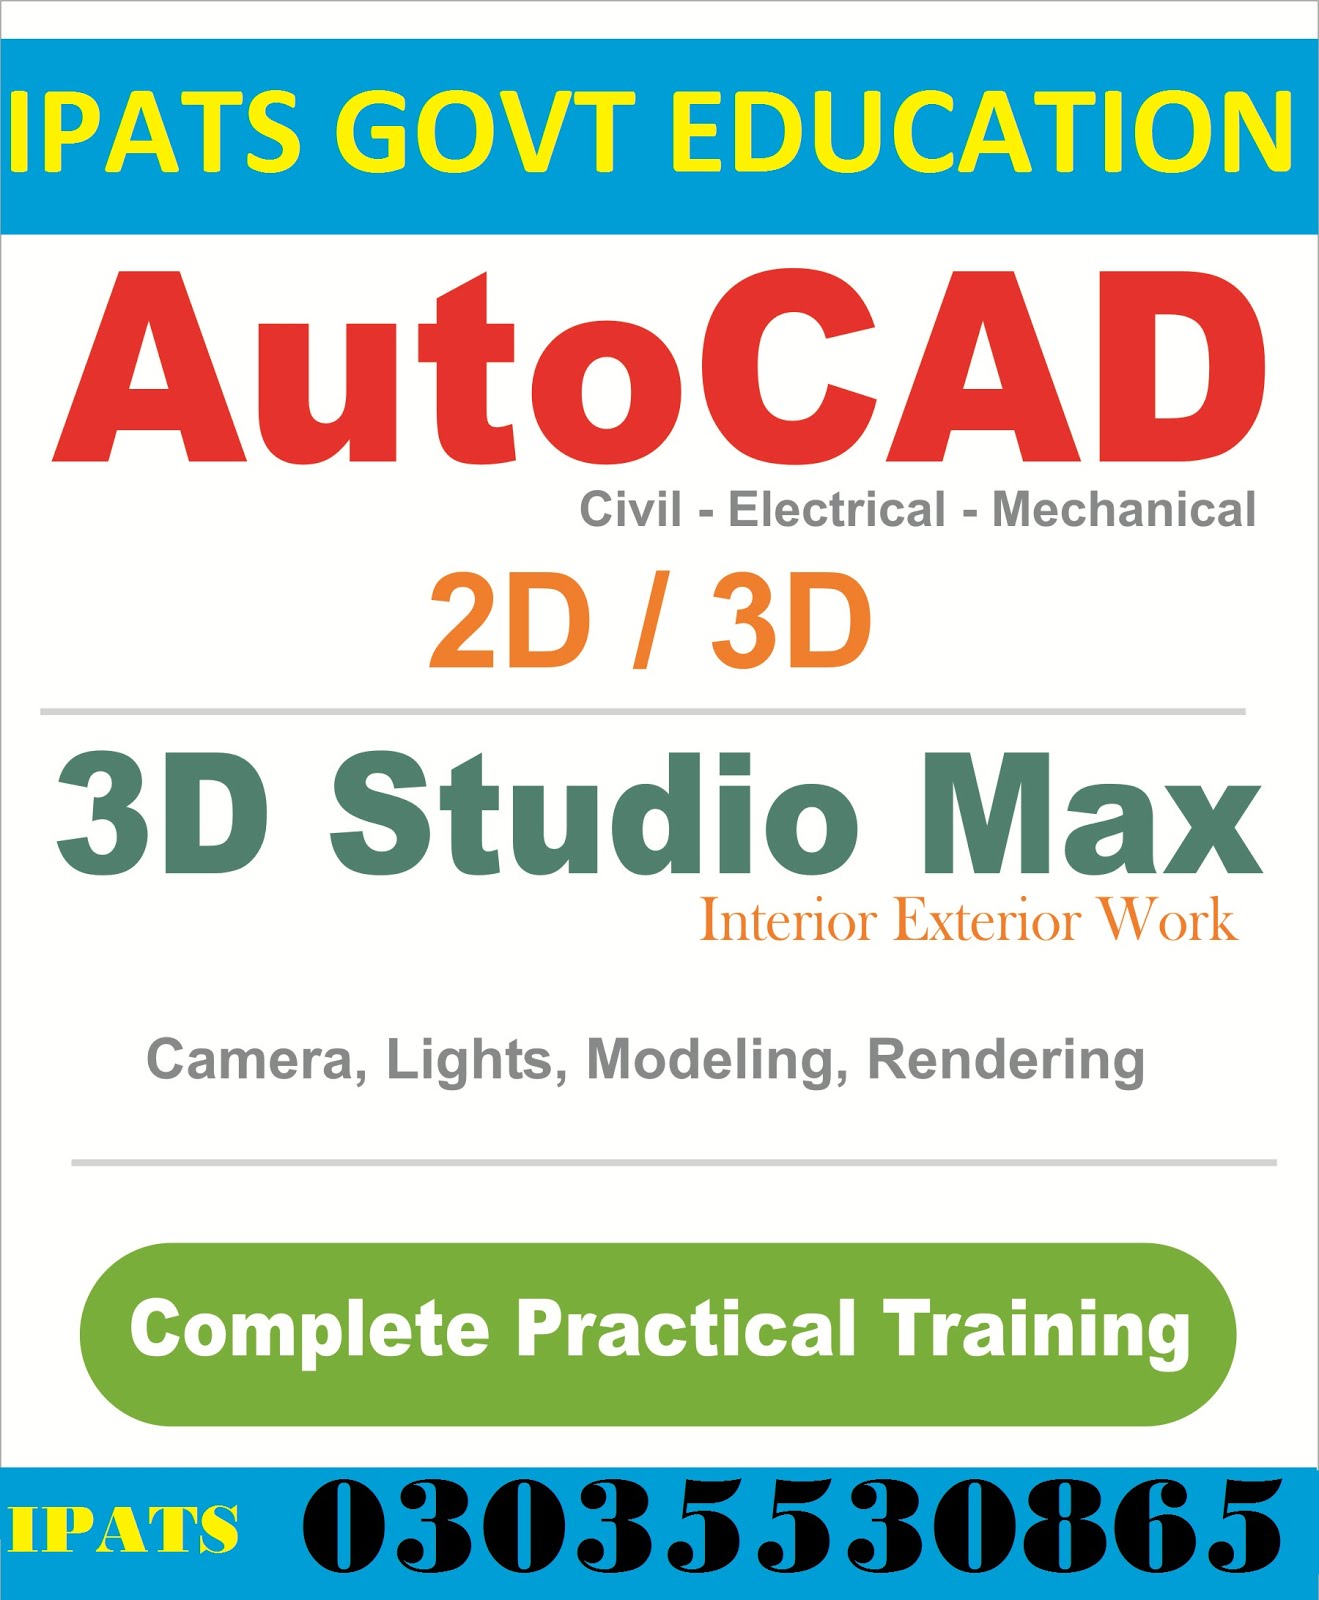 AutoCad 2D/3D Training Course in rwp islamabad, punjab 03035530865 IPATS